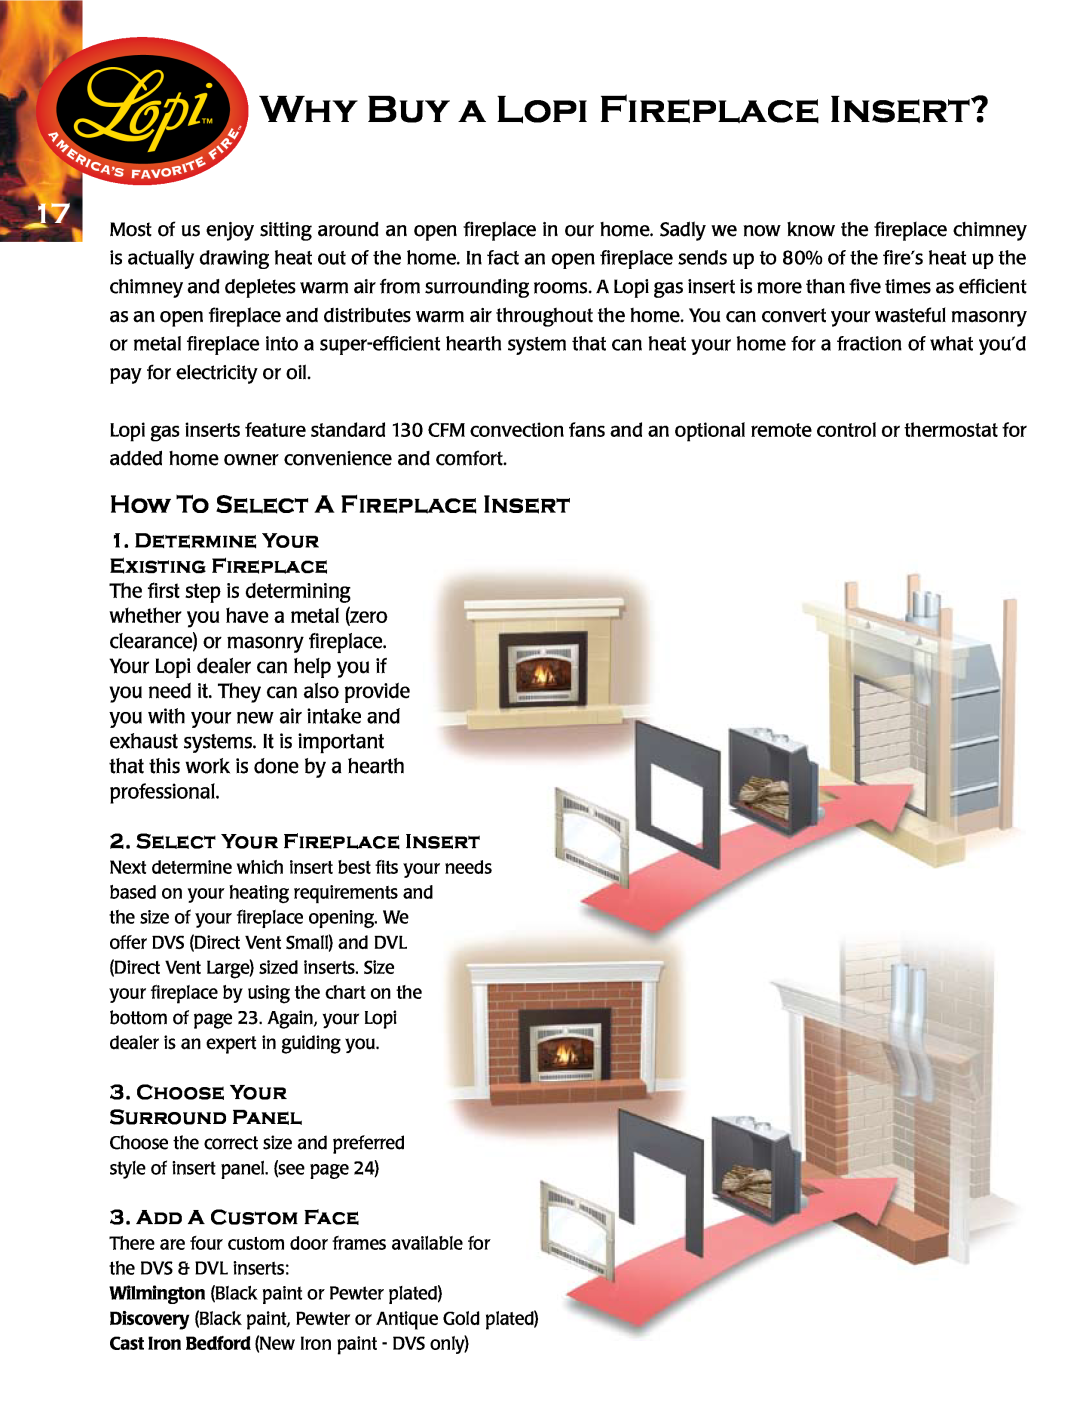 Lopi Gas Stove And Fireplace manual How To Select A Fireplace Insert, Why Buy A Lopi Fireplace Insert?, Add A Custom Face 